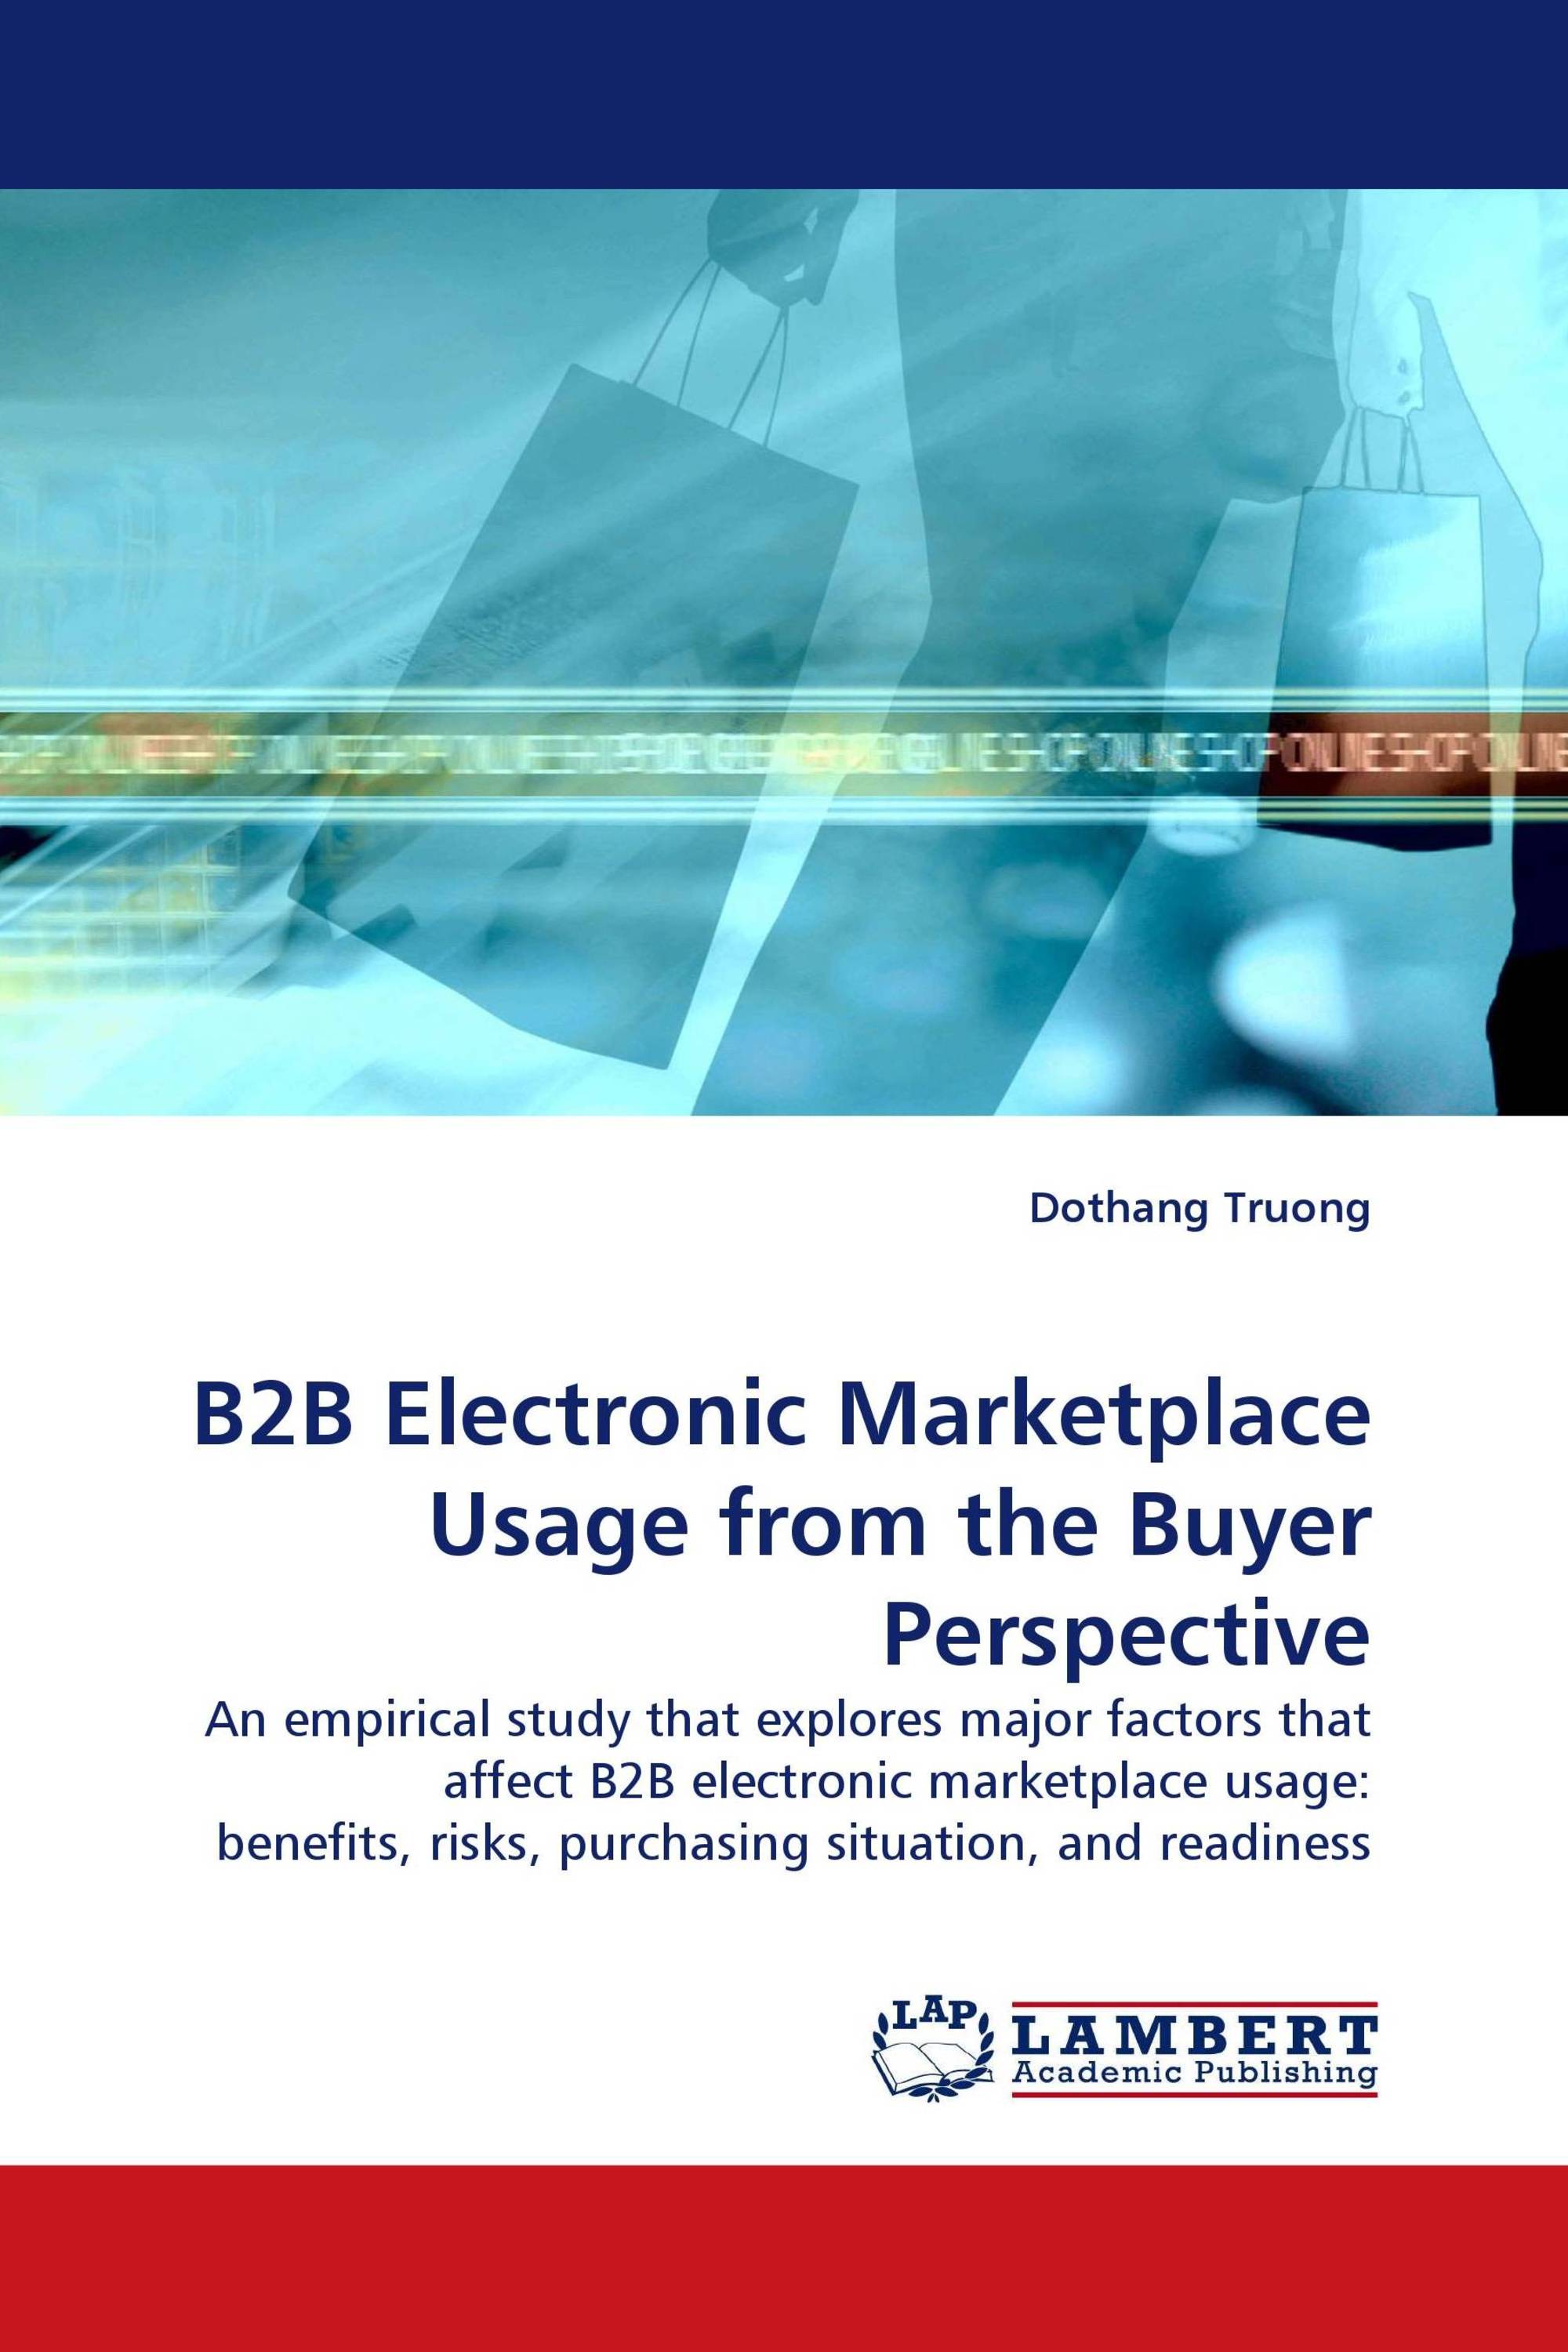 B2B Electronic Marketplace Usage from the Buyer Perspective